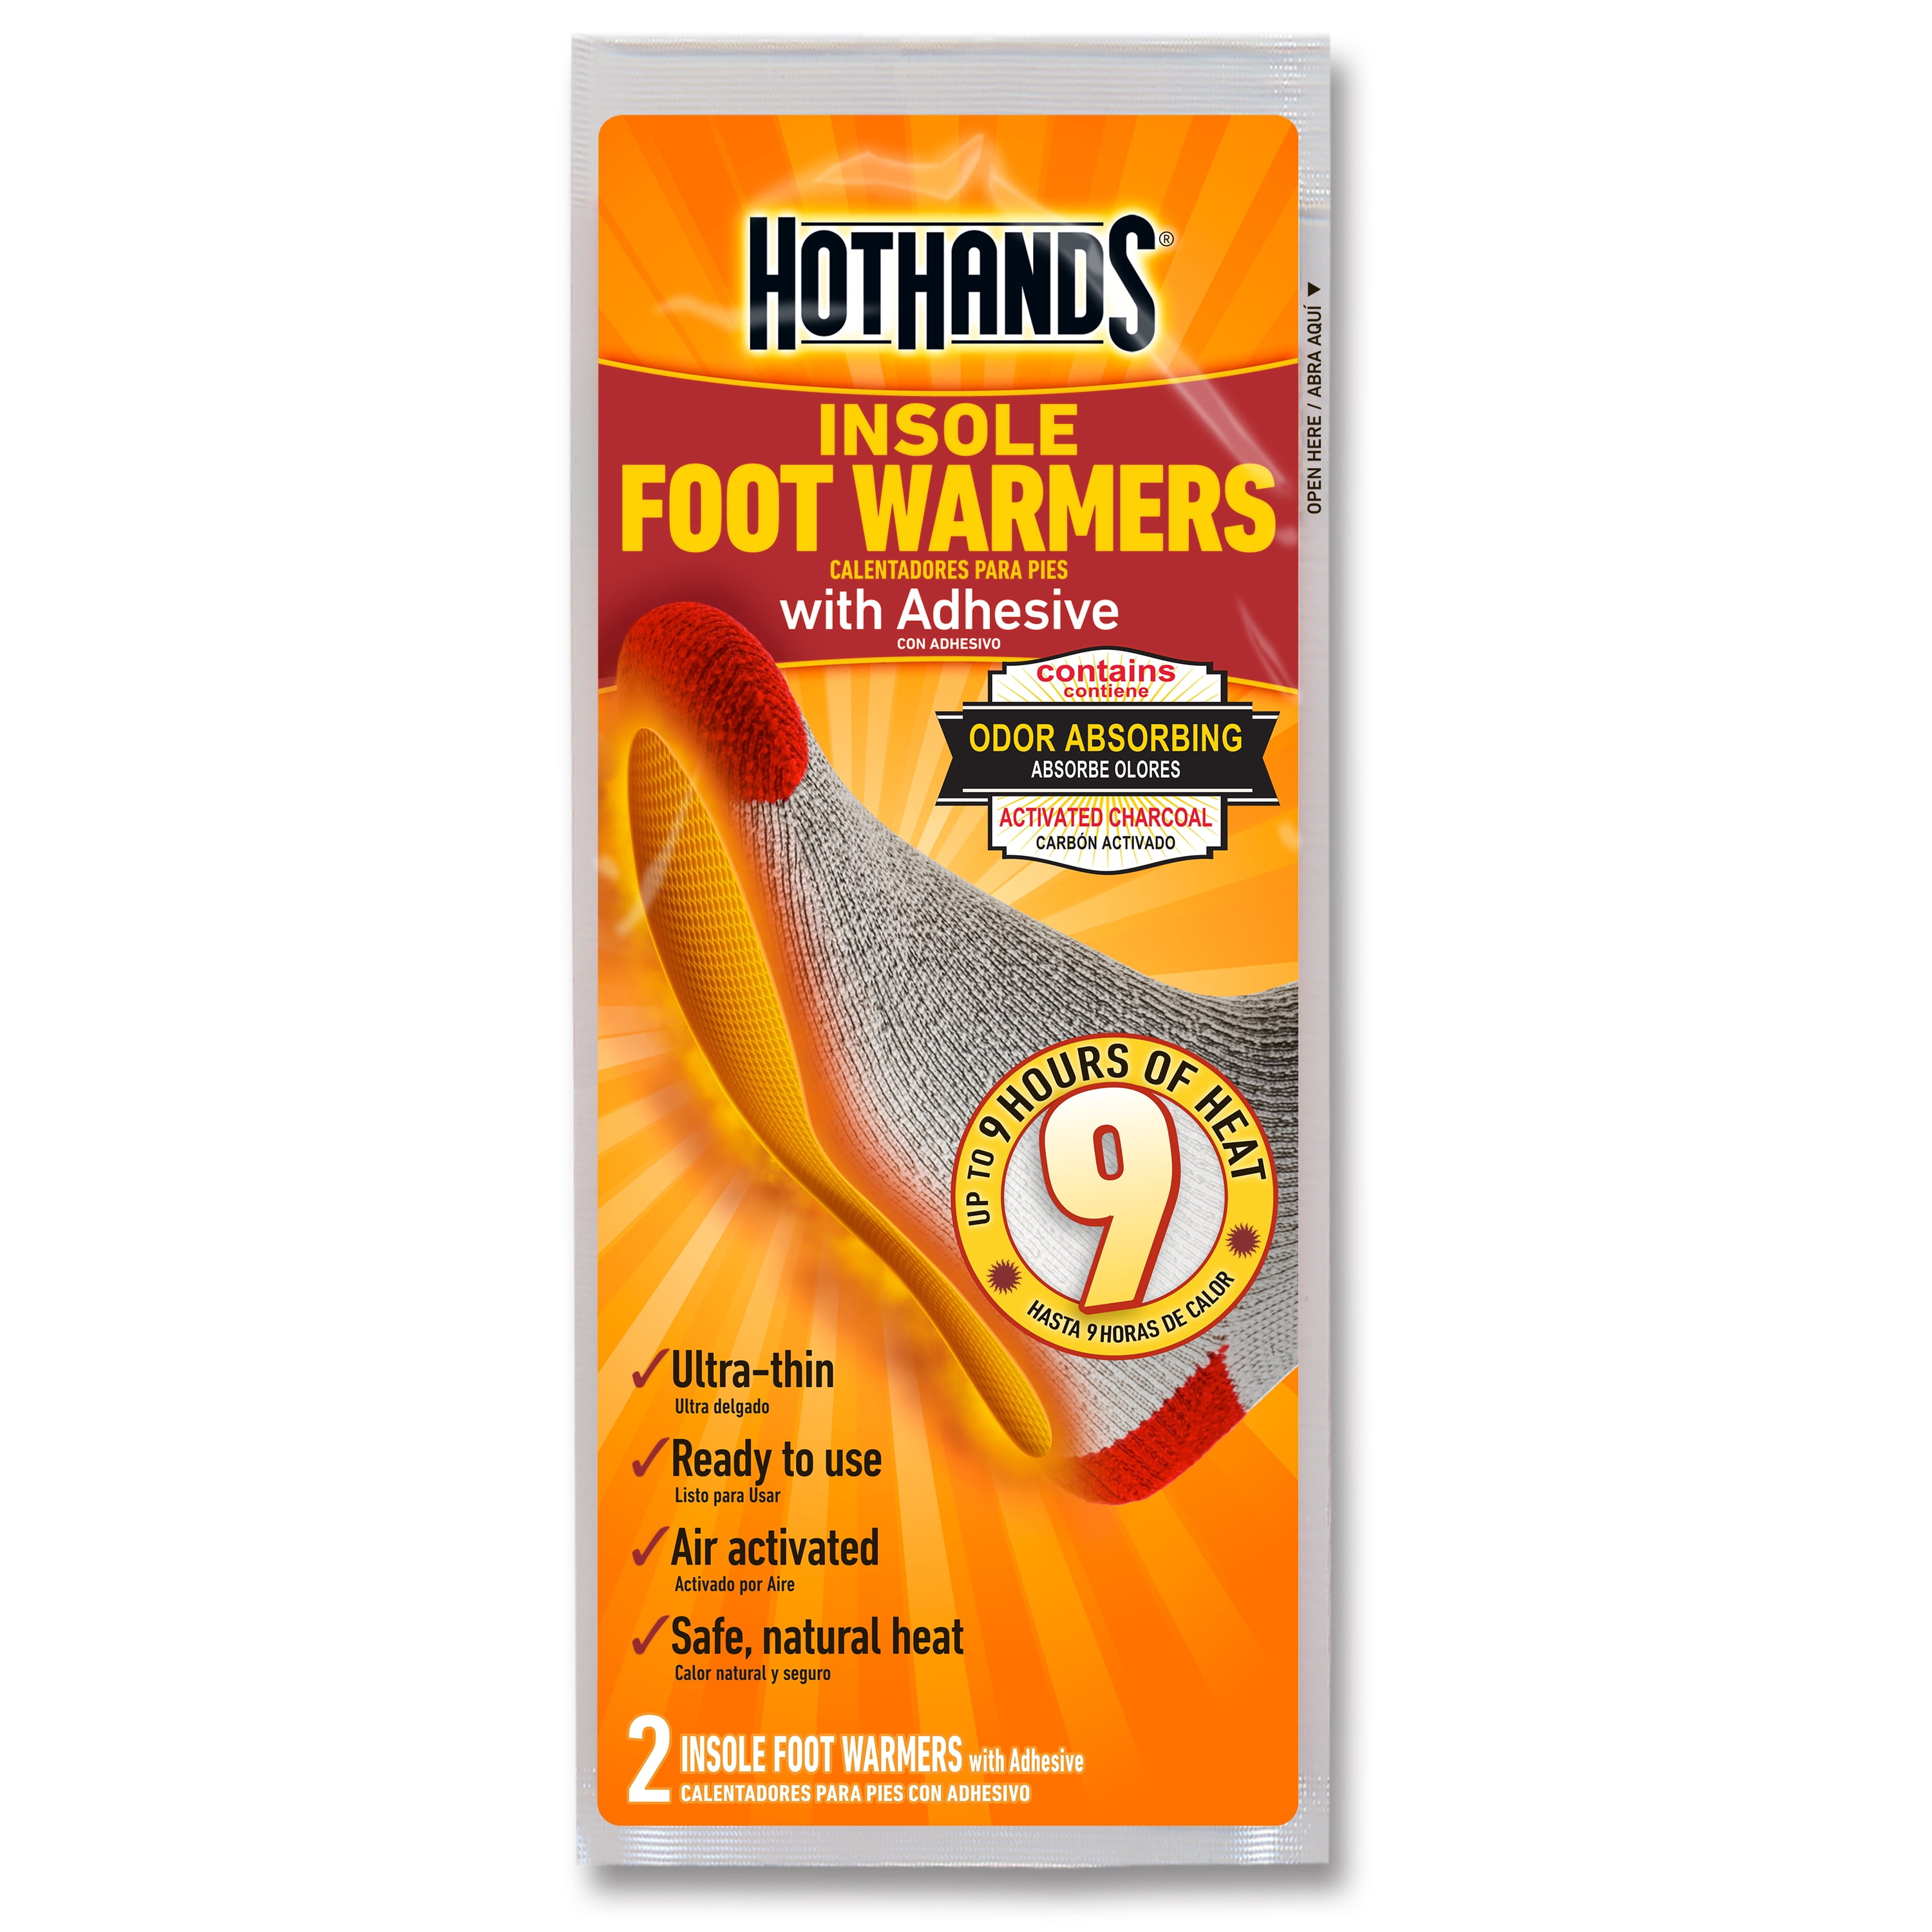 Hot Hands Hothands Disposable Air Activated Foot WARMERS New 